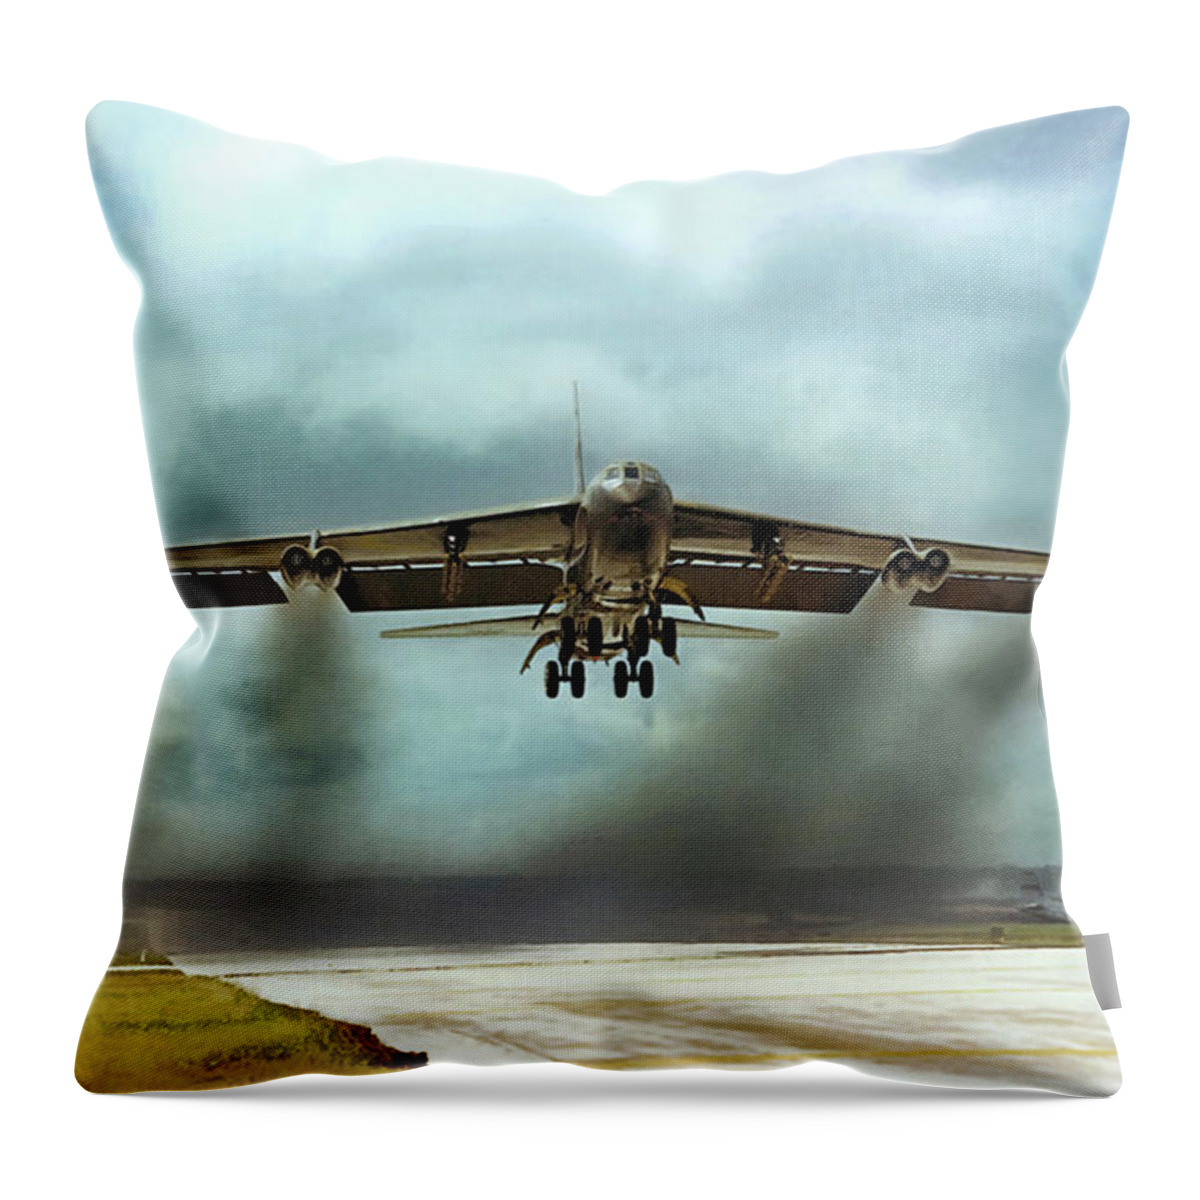 Aviation Throw Pillow featuring the digital art Ascension by Peter Chilelli